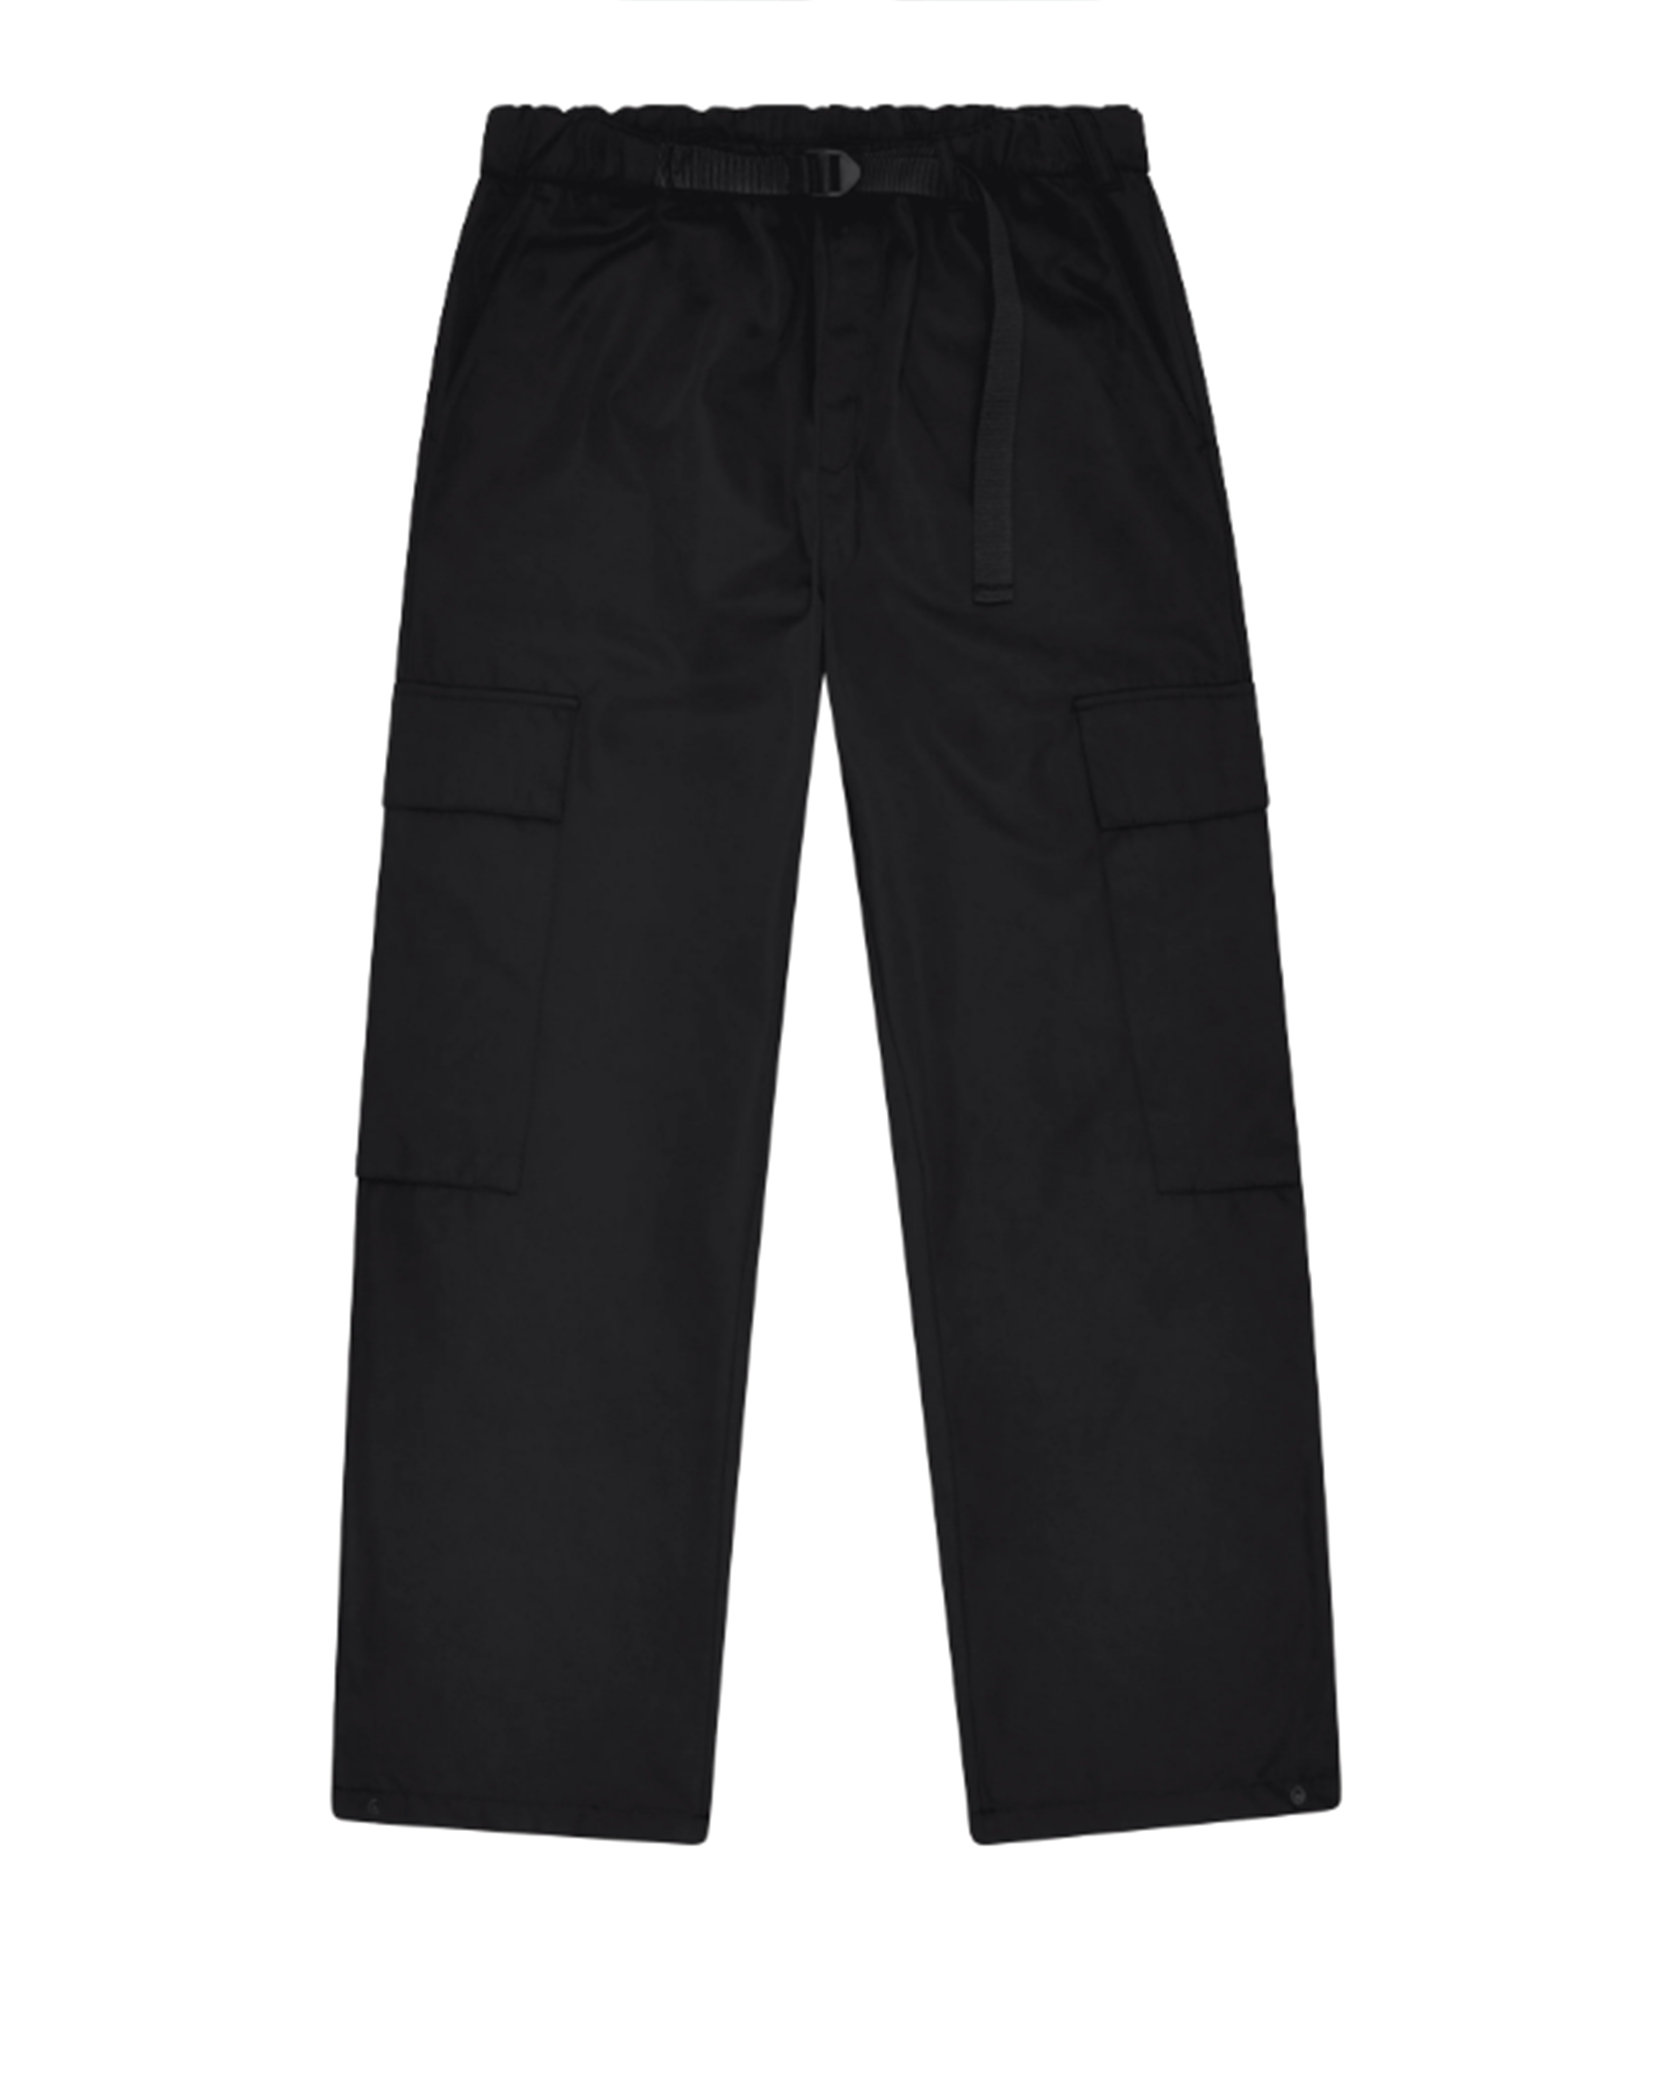 About blank - utility pant black